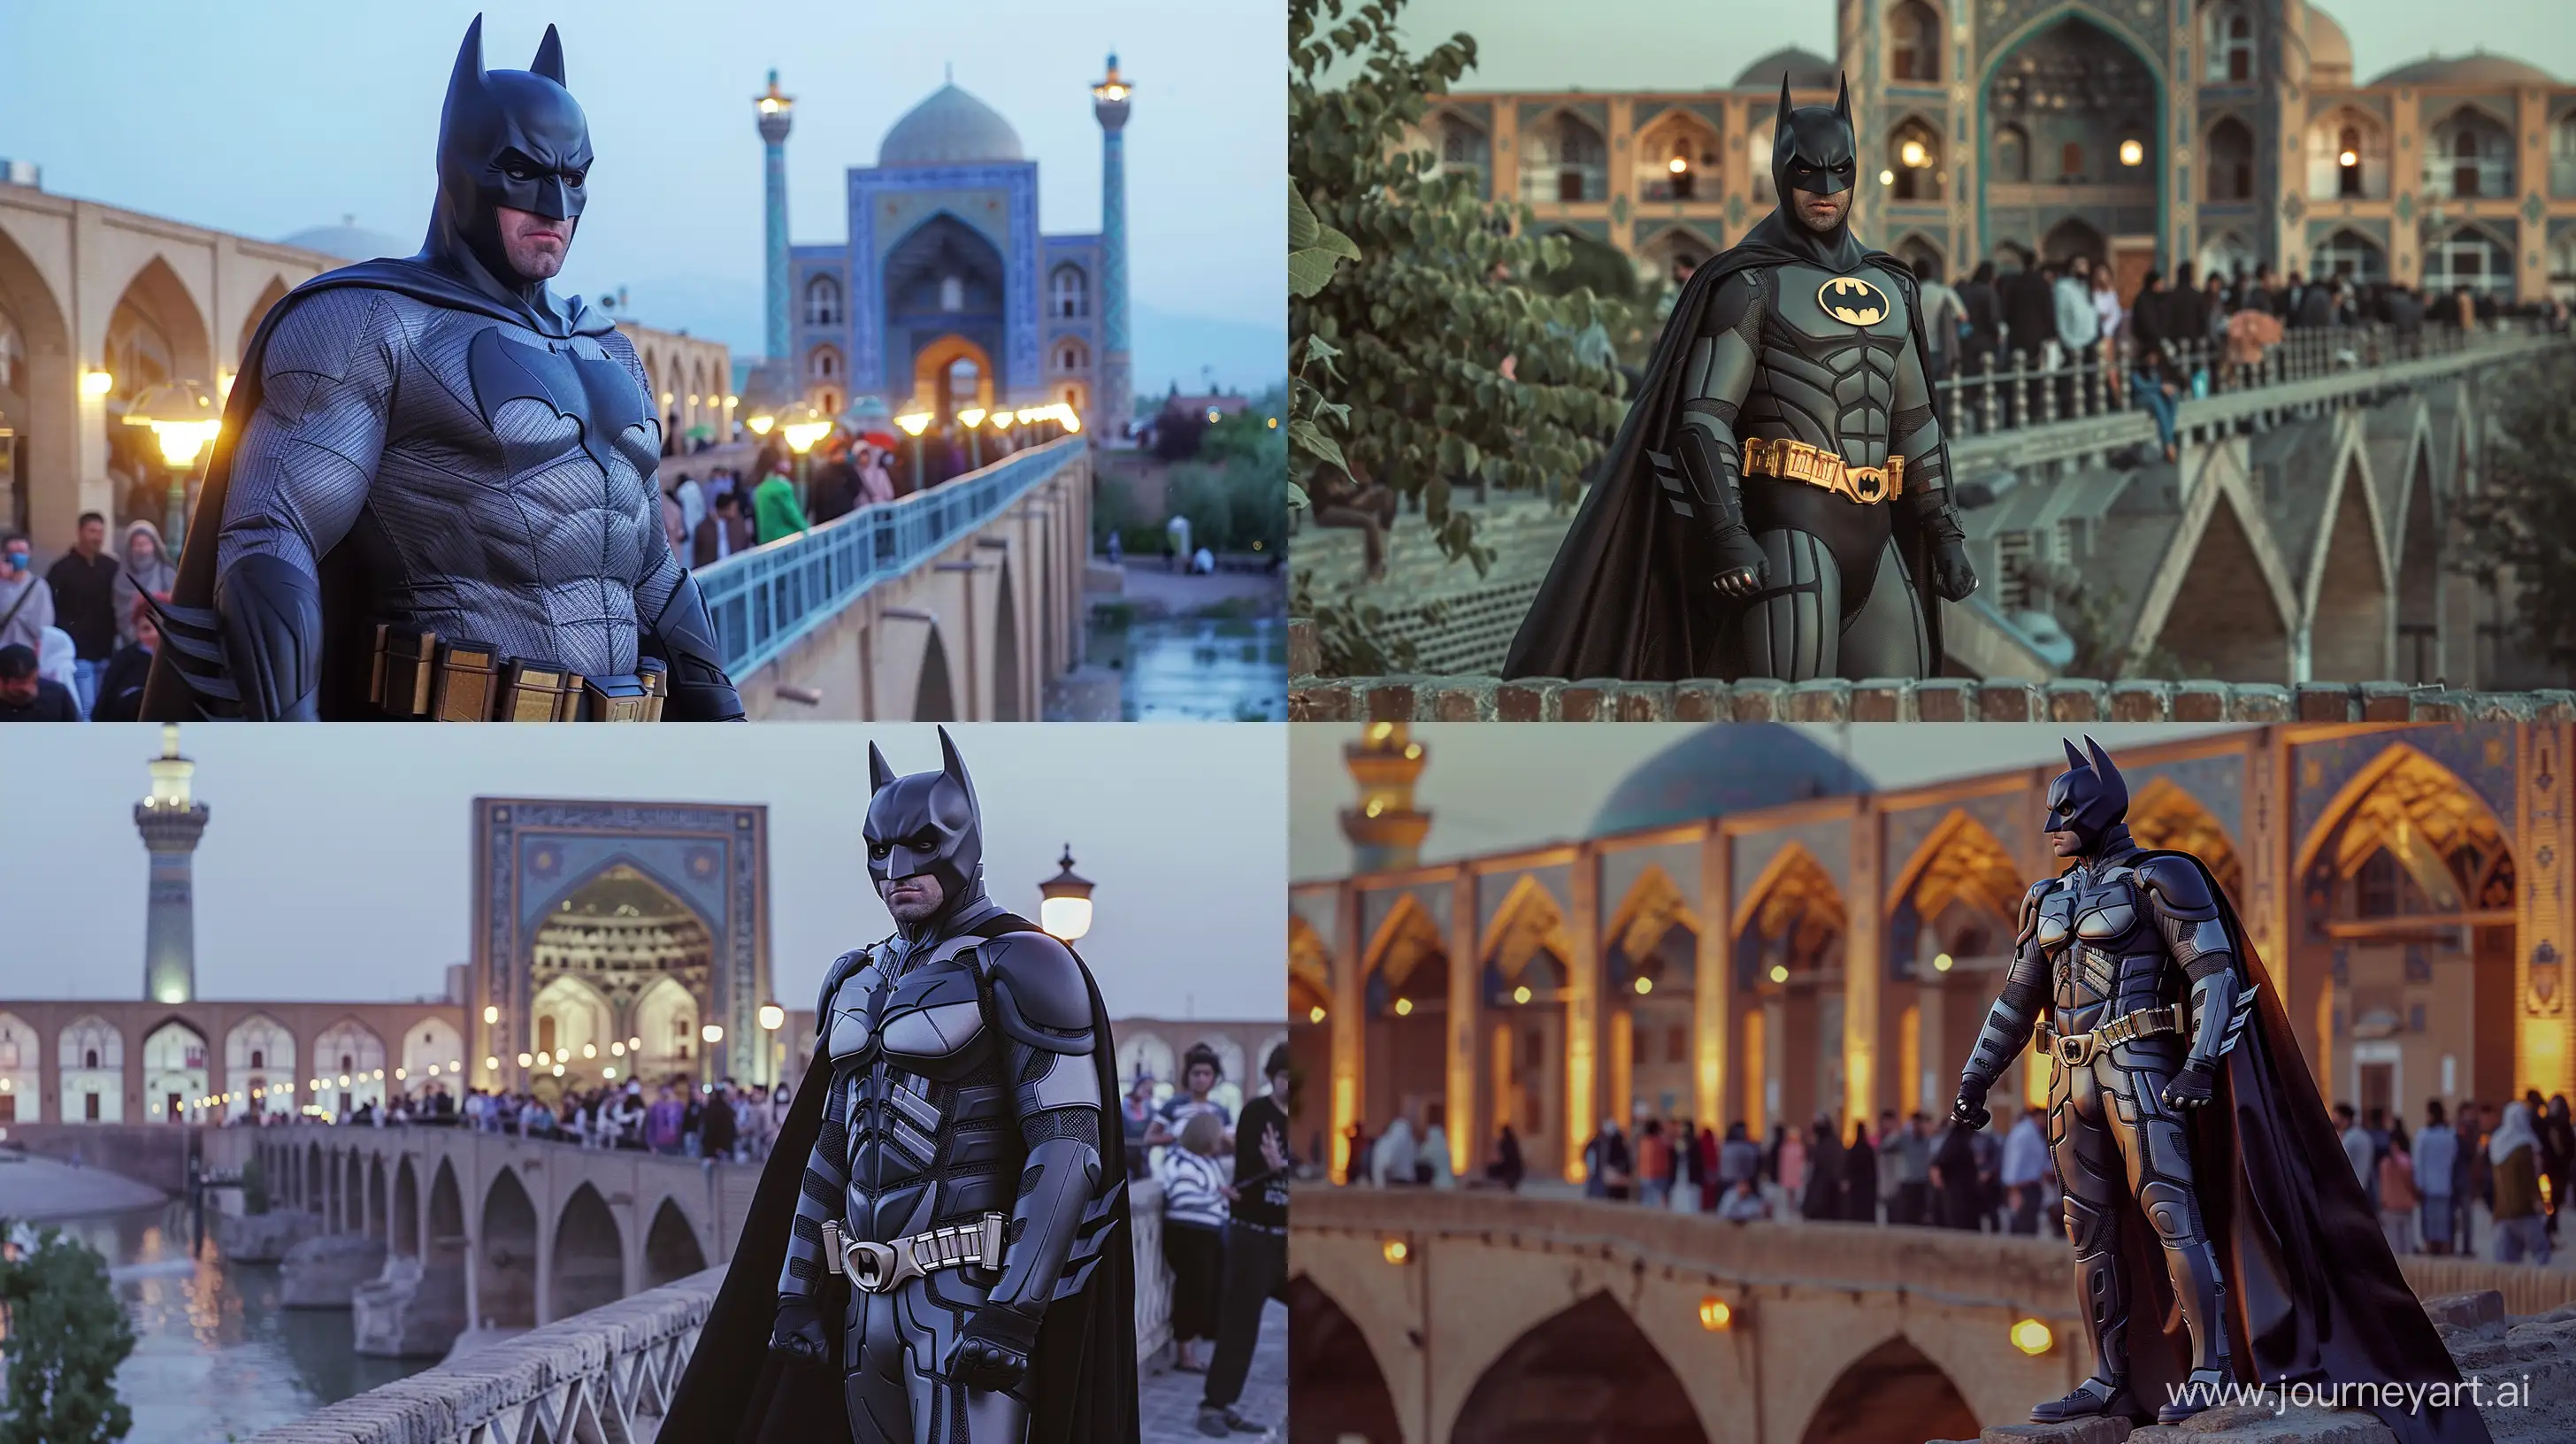 Batman-on-Siosepol-Bridge-in-Isfahan-with-Historic-Persian-Architecture-and-Dynamic-Pose